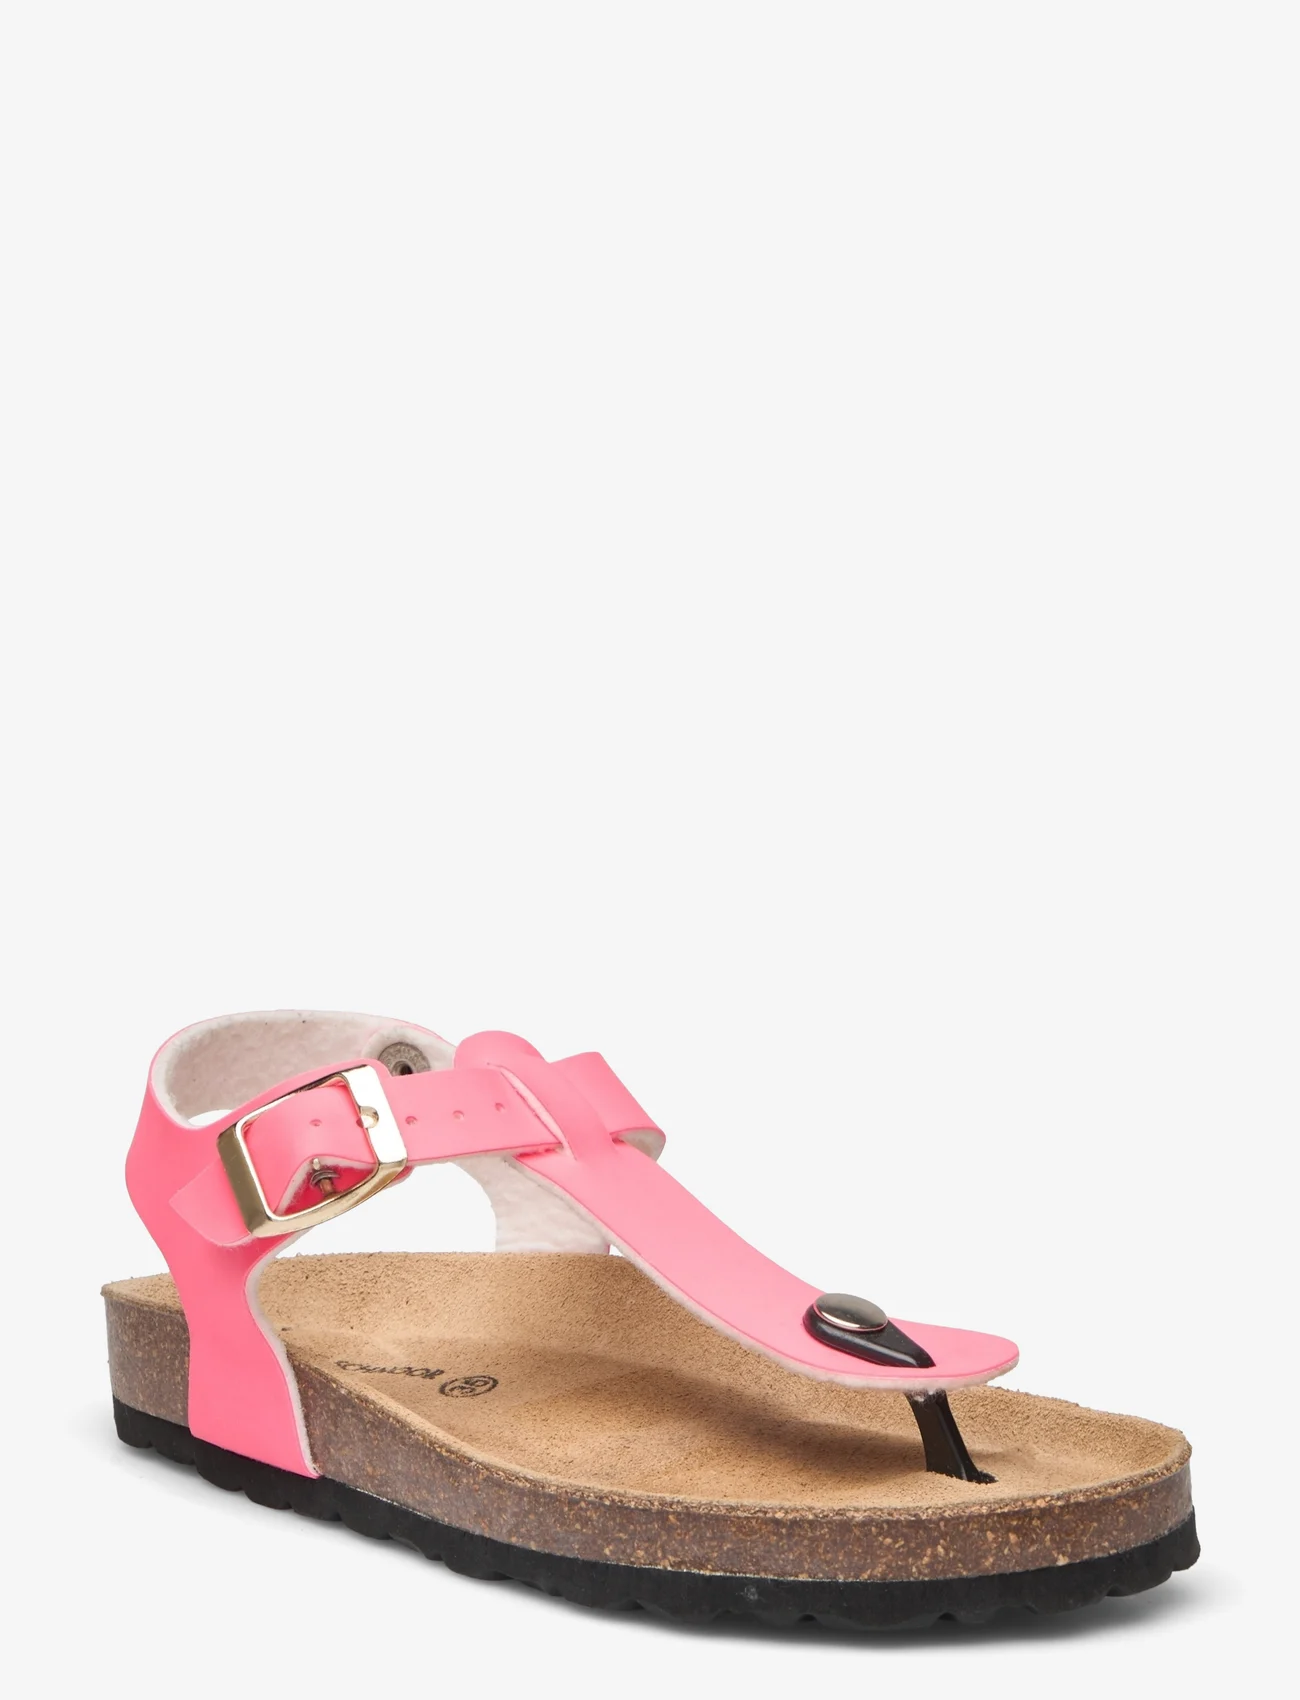 Sofie Schnoor Baby and Kids - Sandal lacquer - sommerschnäppchen - coral pink - 0